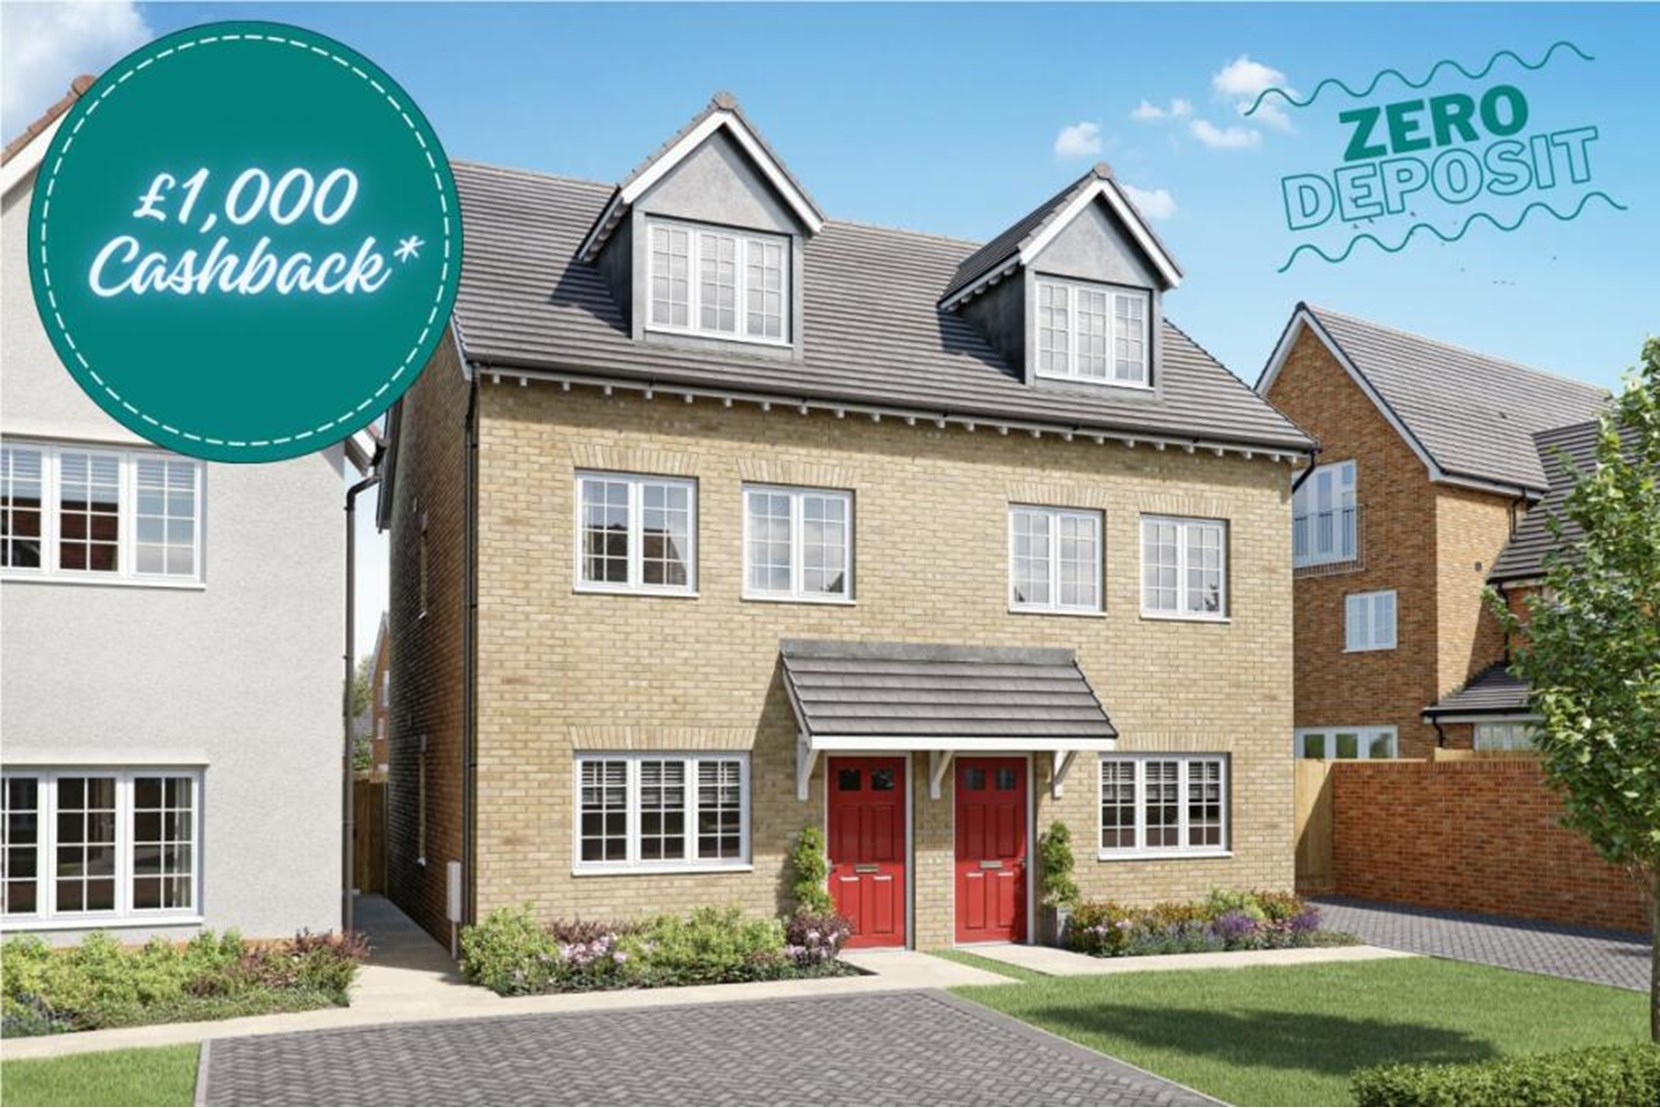 Homes to Rent by Allsop at Spinning Fields, Braintree, Essex, CM7, Mullberry special offer